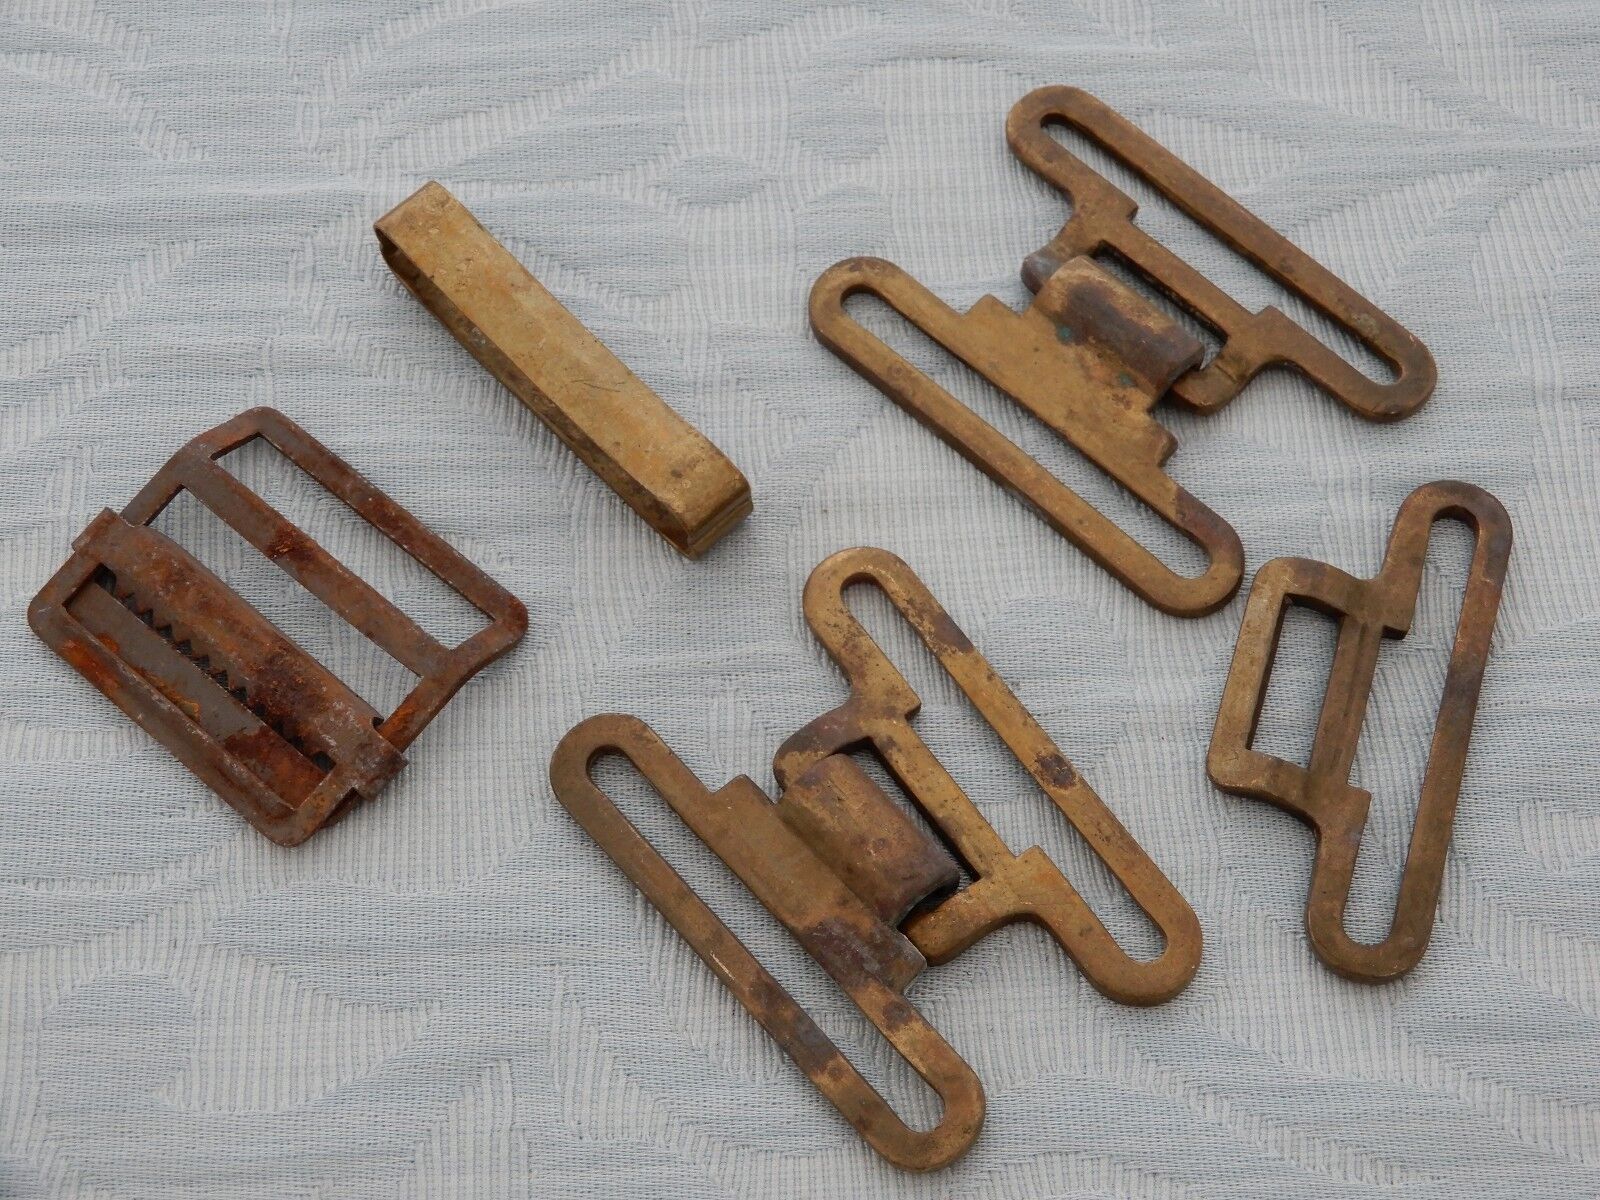 Army WW1 Belt fixings and buckles, as found in an old estate, not cleaned